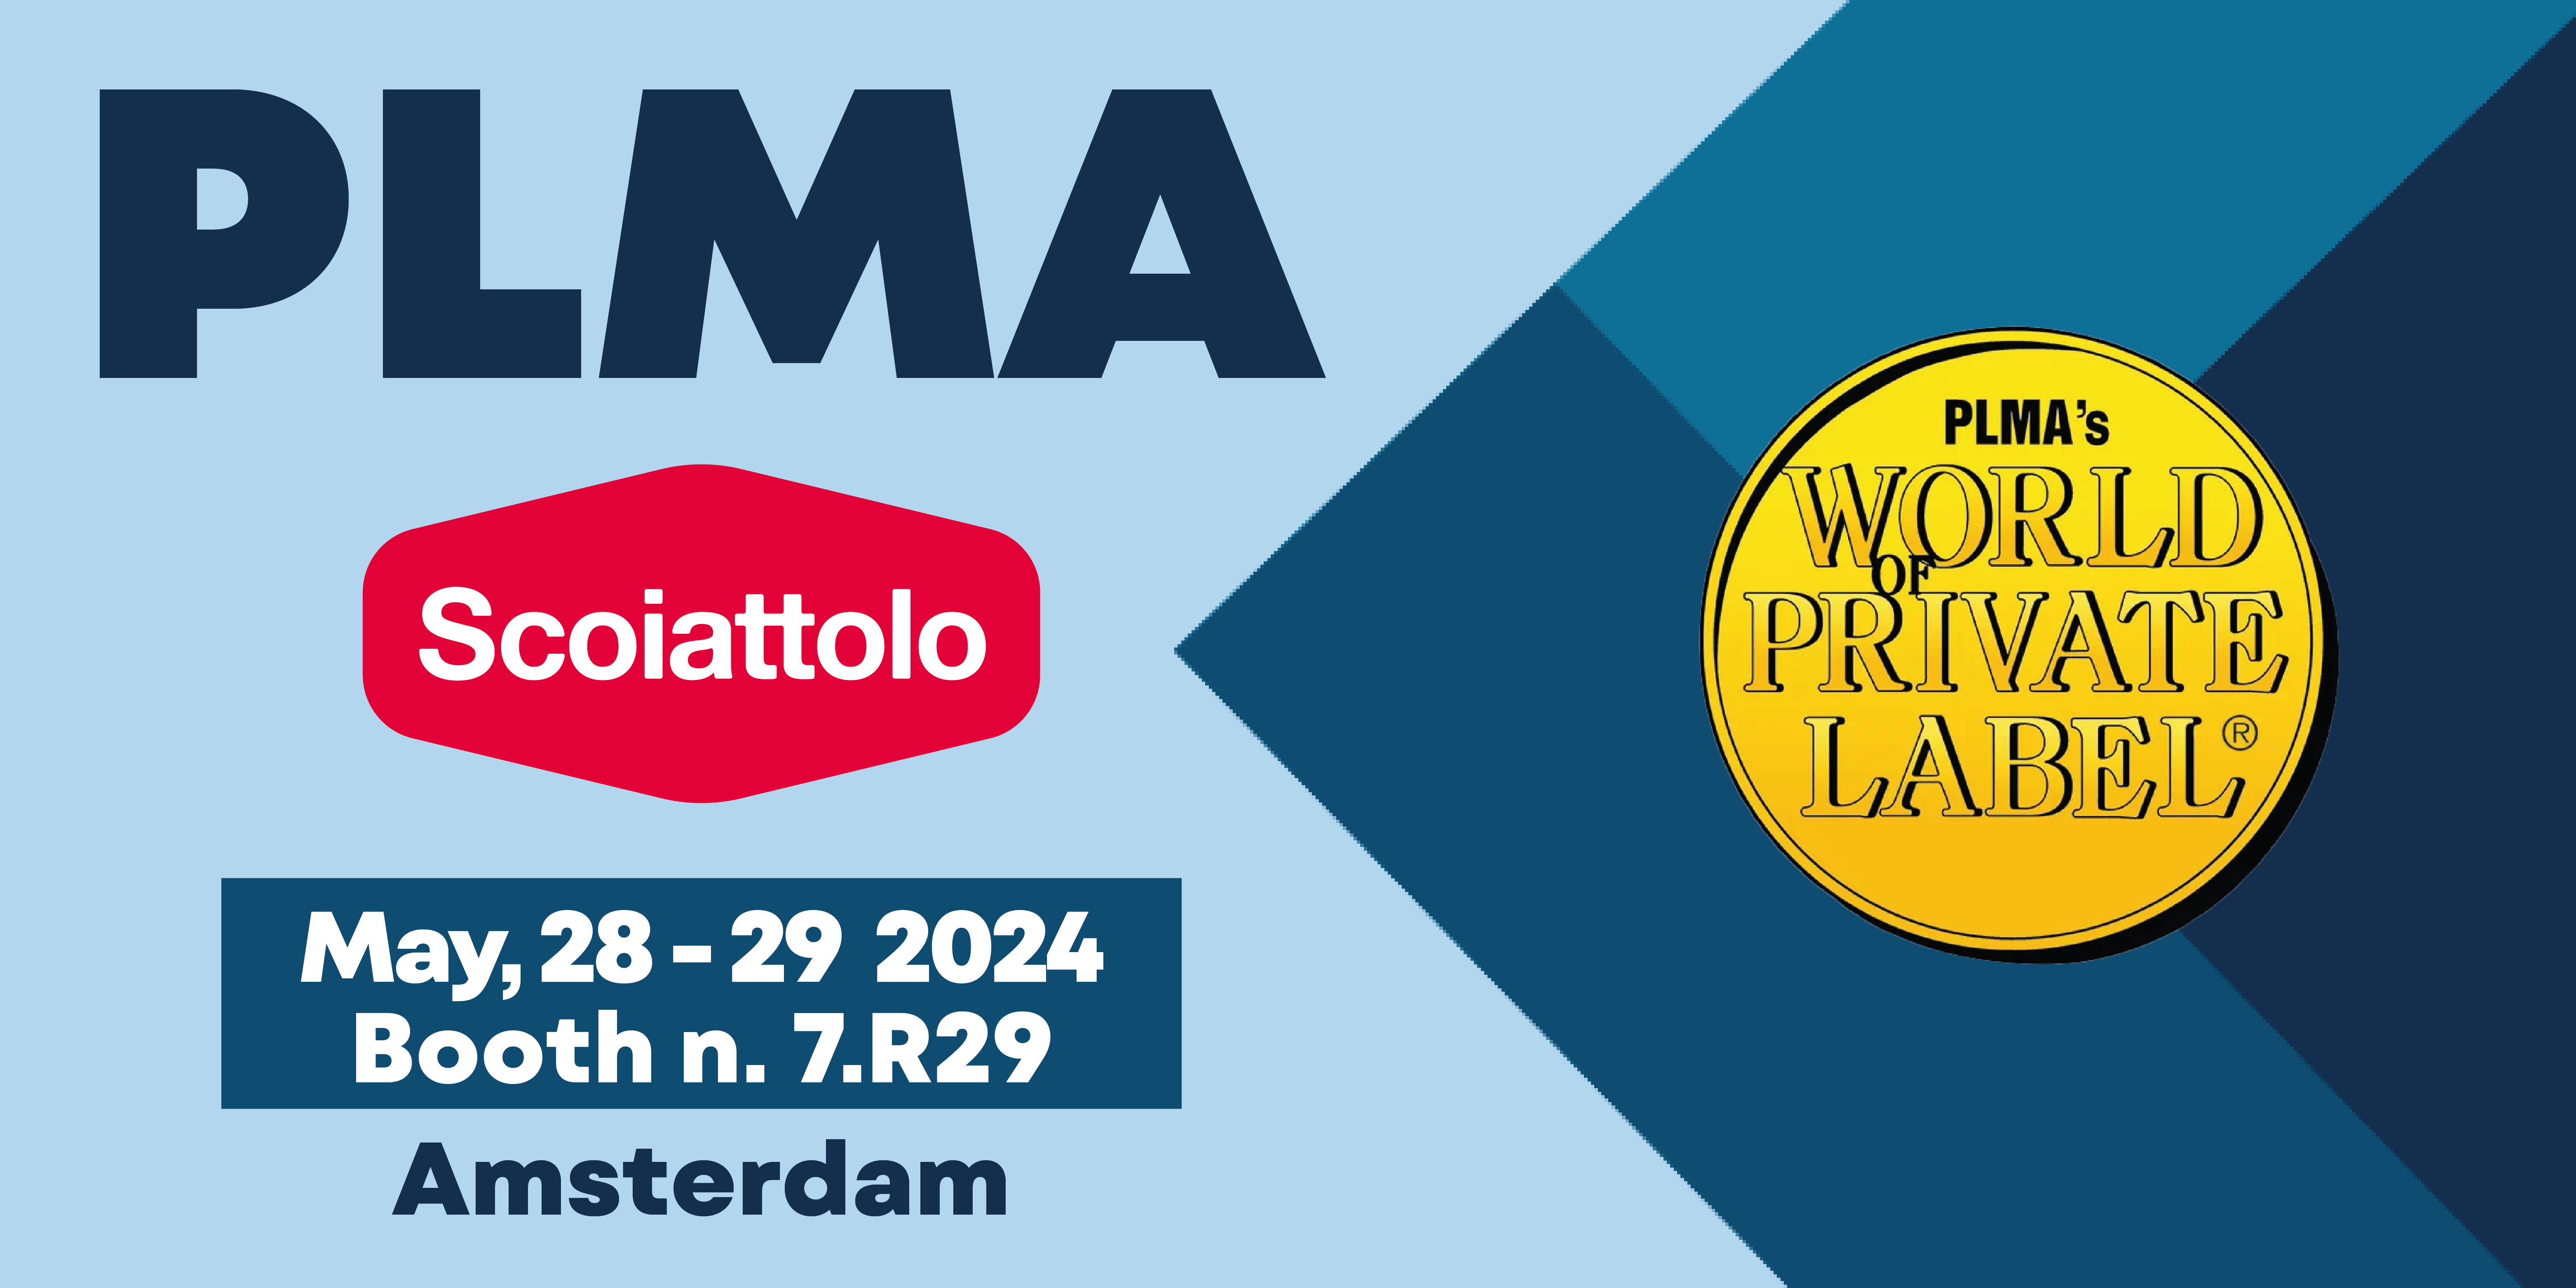 SCOIATTOLO AT PLMA 2024: <br> from 28 to 29 May in Amsterdam